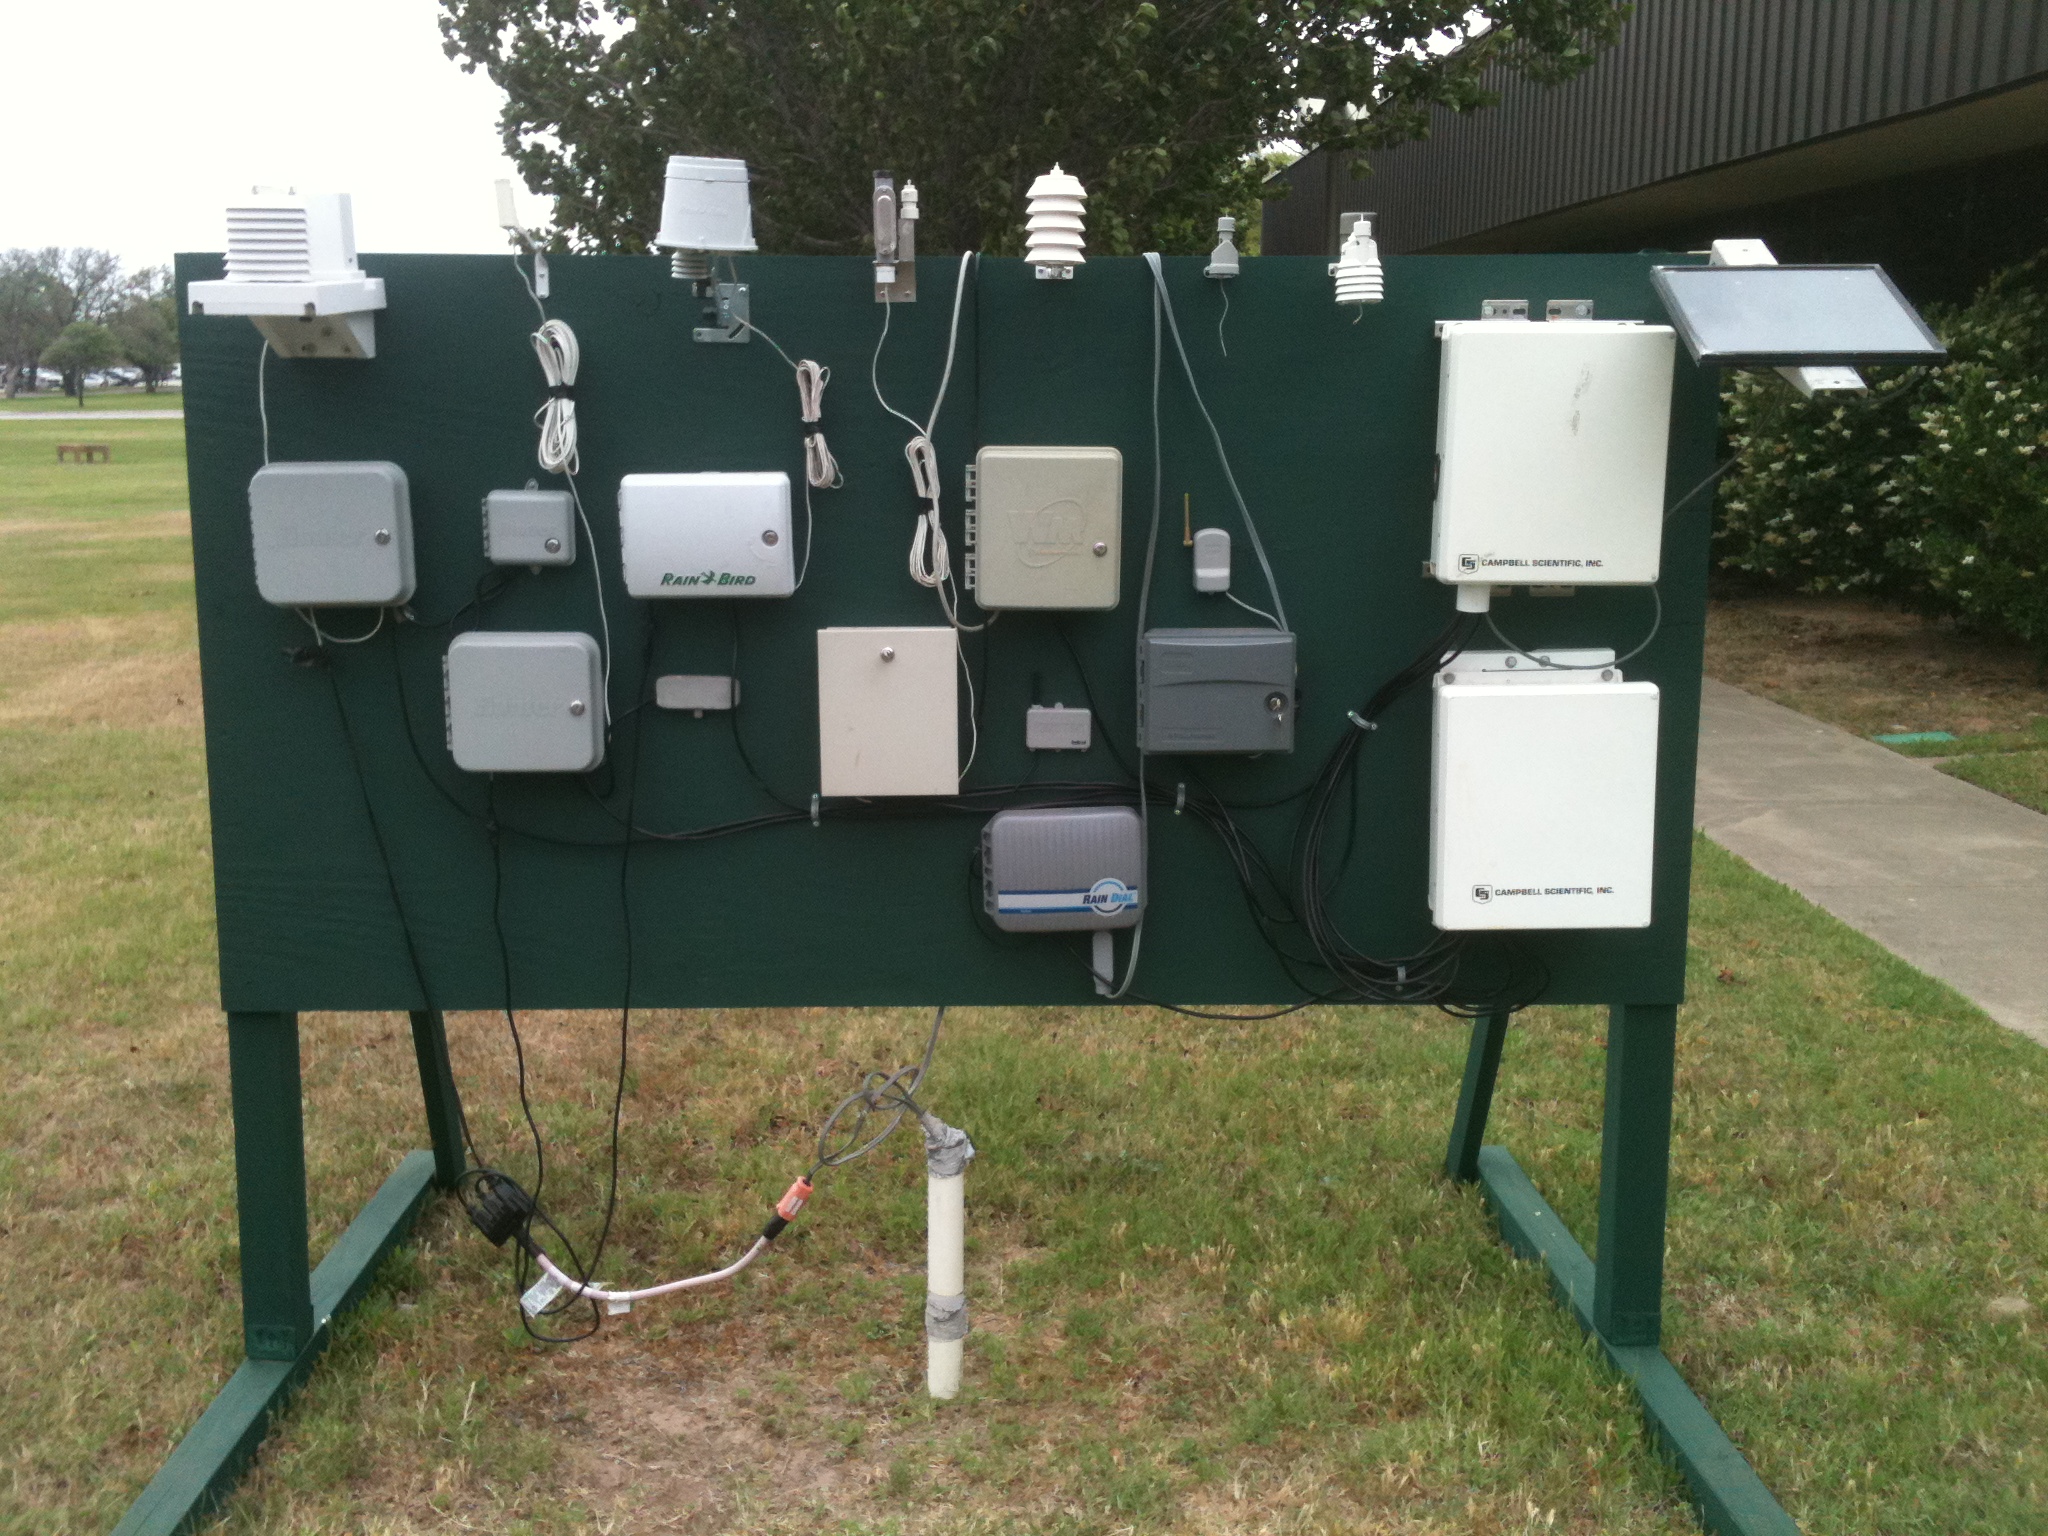 Irrigation Smart Controllers being evaluated for study